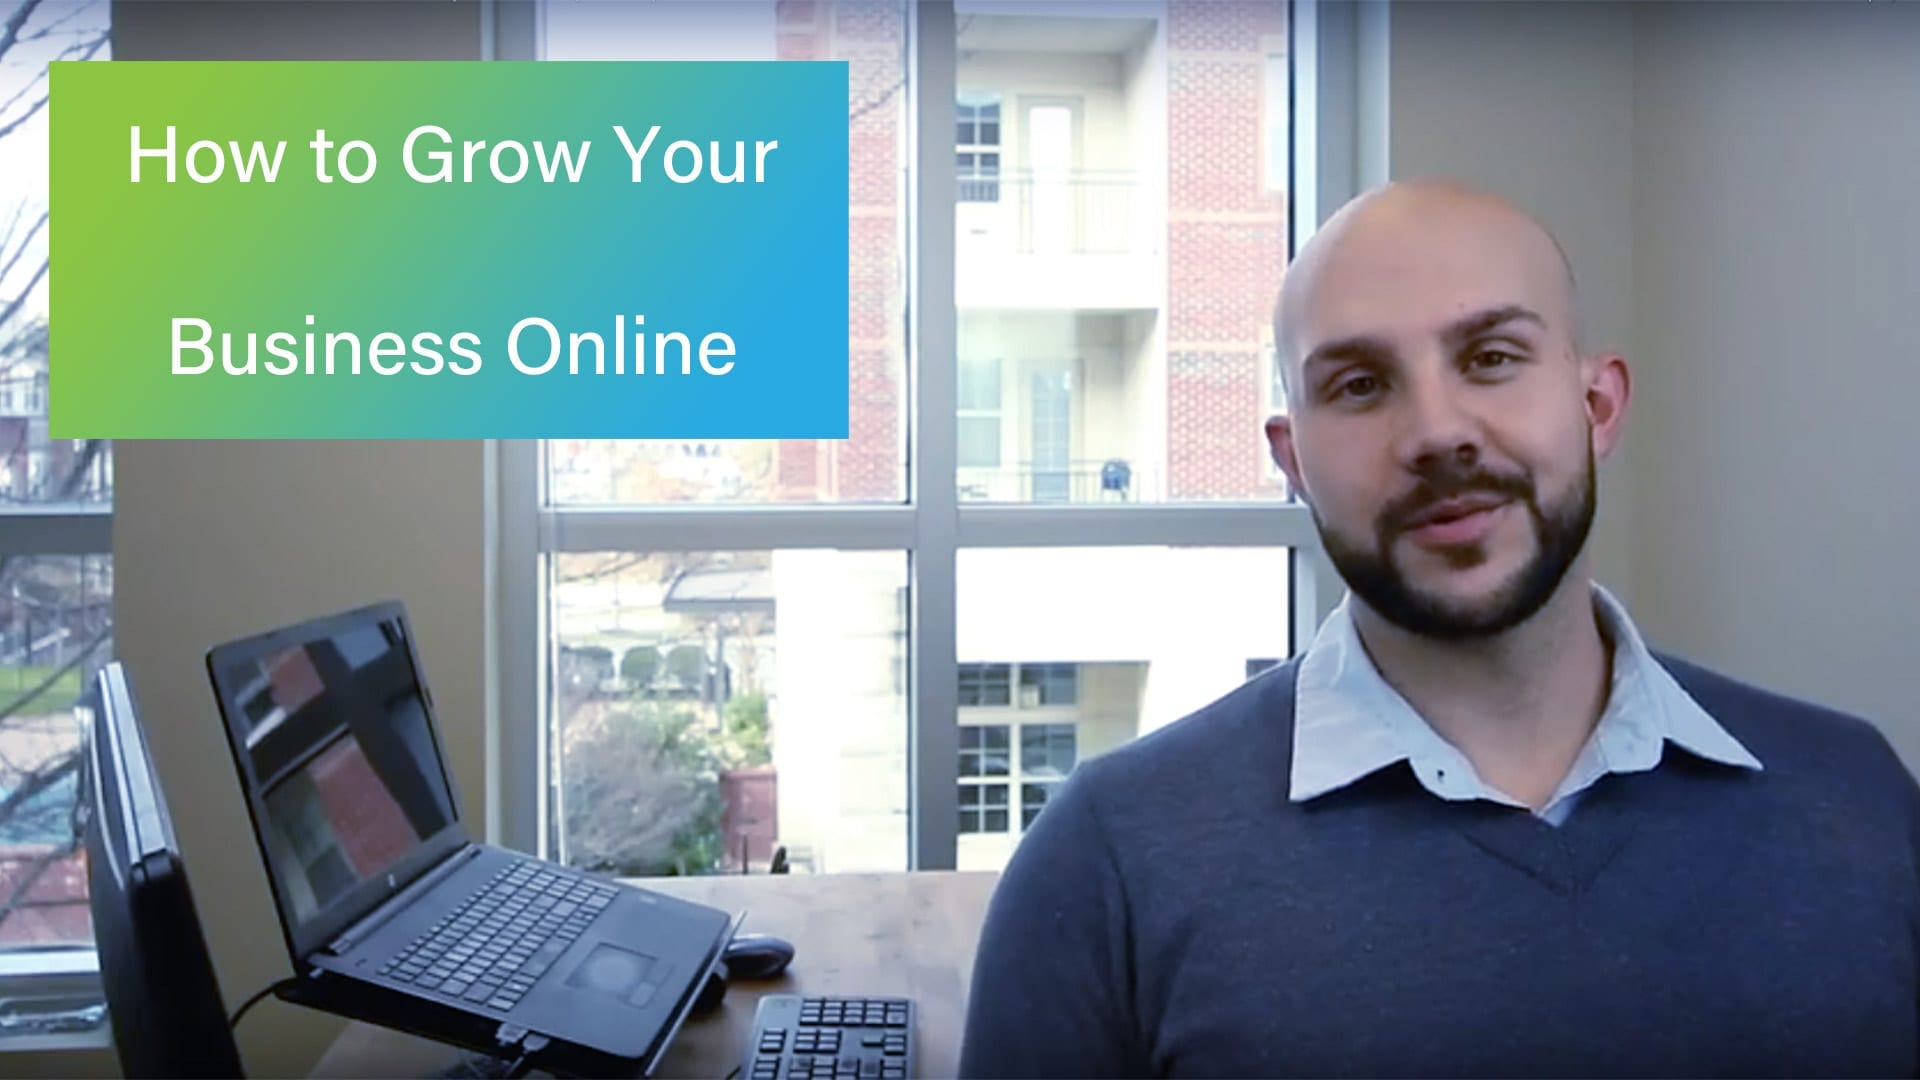 Justin Salvetti discussing how to grow your business online